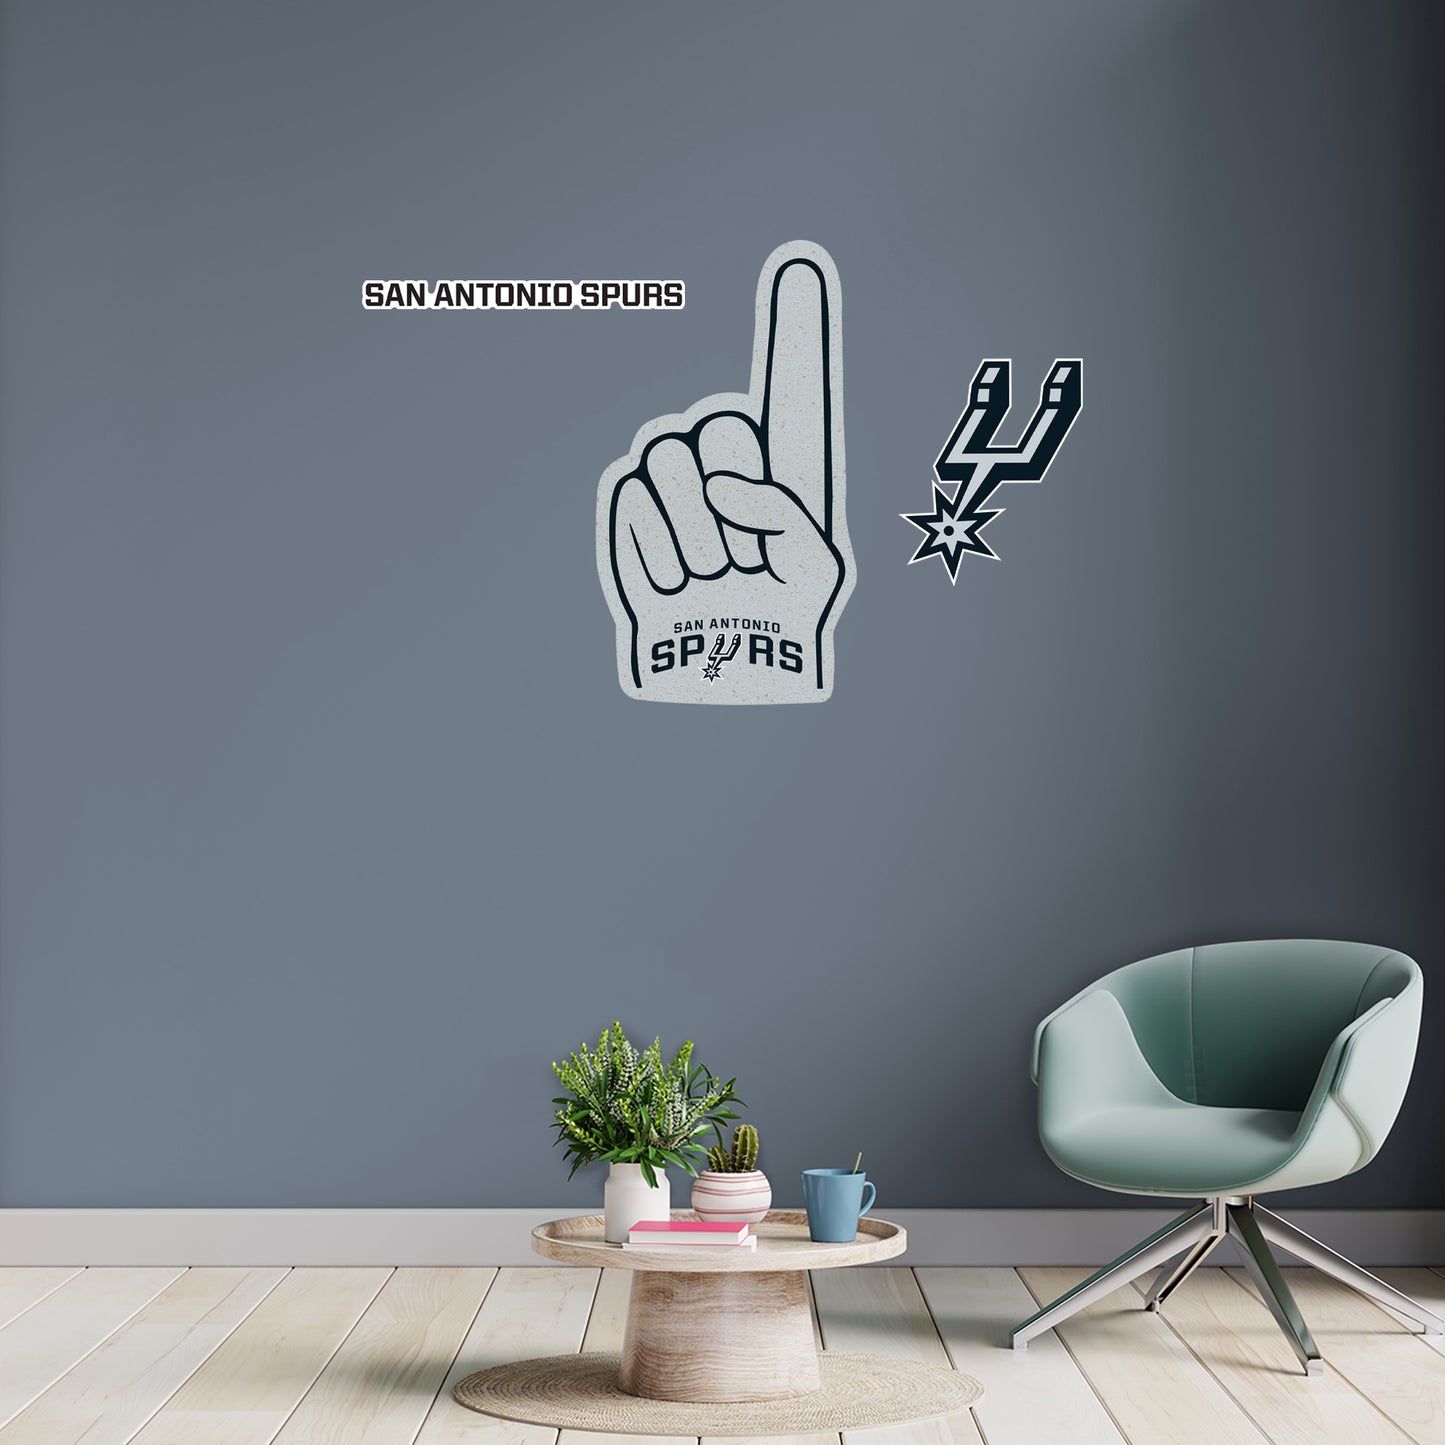 San Antonio Spurs: Foam Finger - Officially Licensed NBA Removable Adhesive Decal